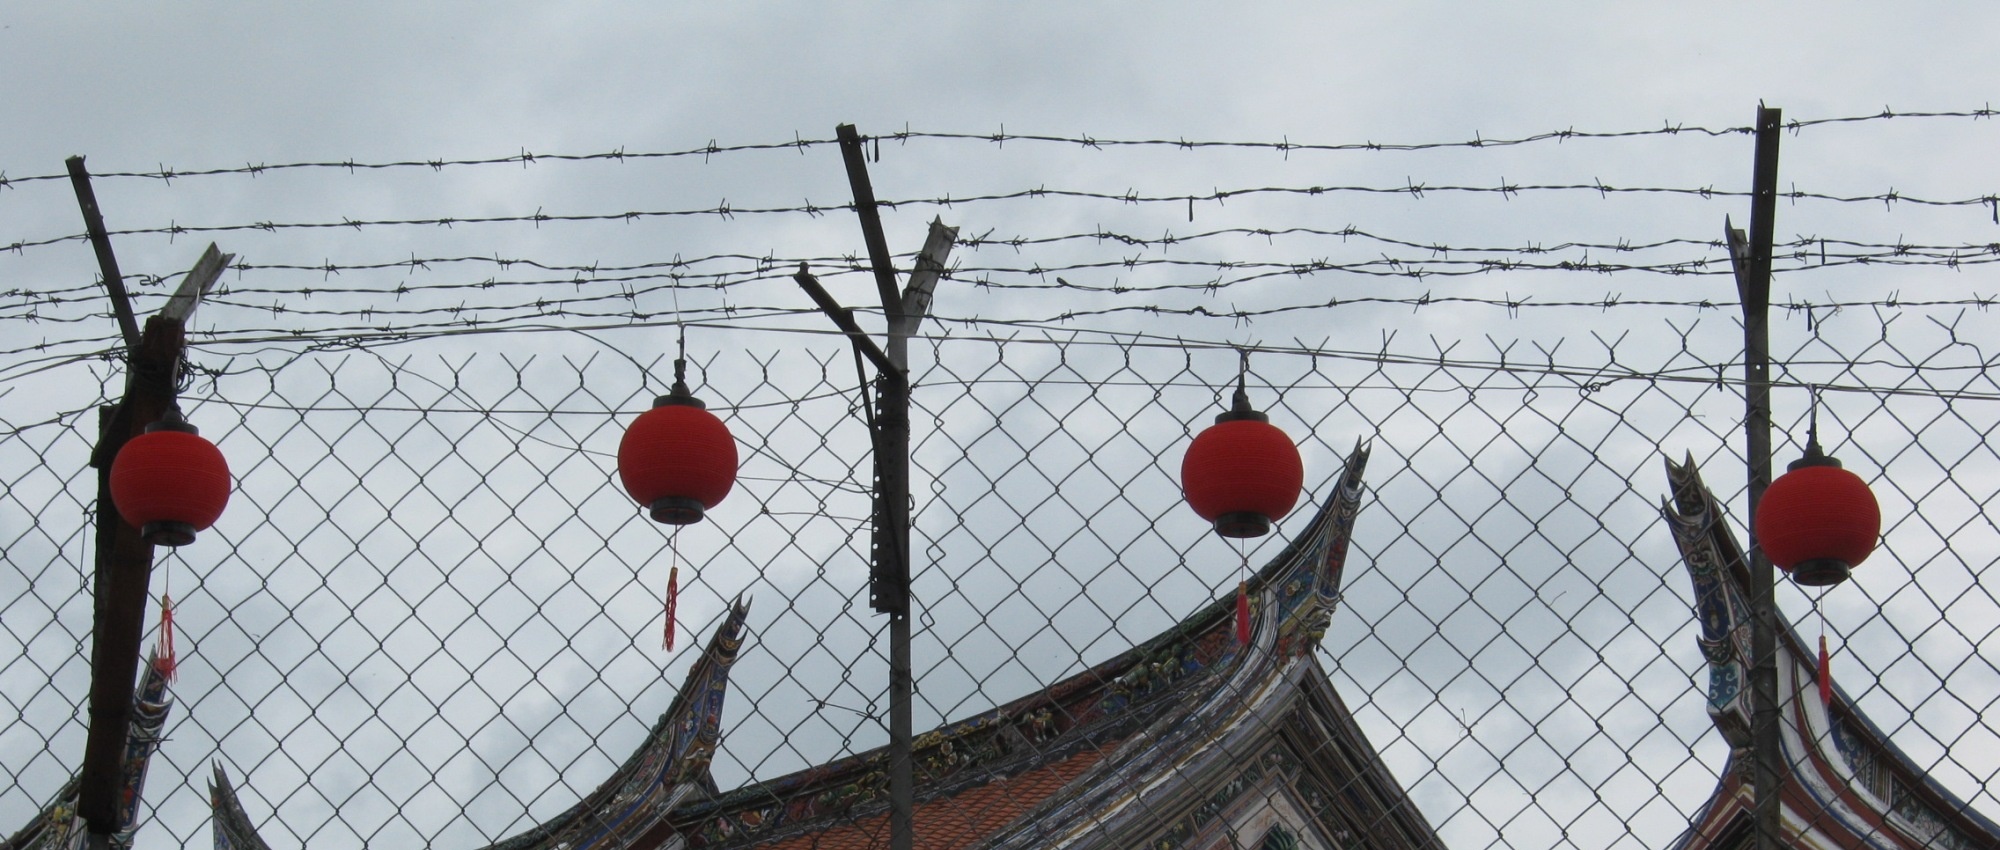 Red lanterns hanging on a barbed wire fence